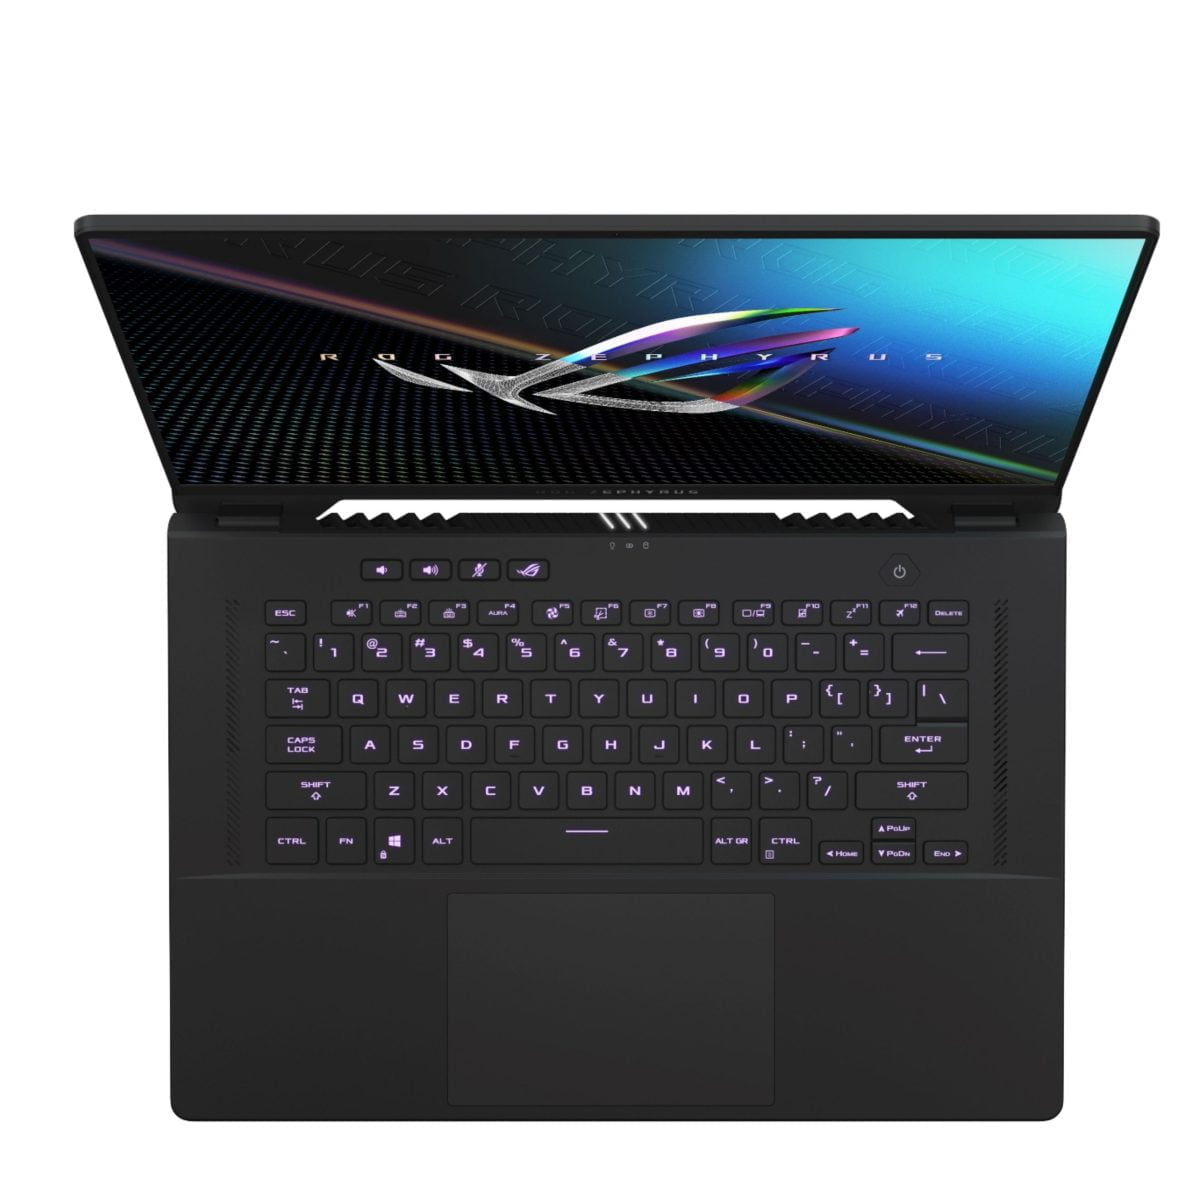 6464203Cv3D Scaled Asus &Lt;H1 Class=&Quot;Heading-5 V-Fw-Regular&Quot;&Gt;Asus - Rog Zephyrus M16 Gu603 Gaming Laptop - Intel Core I9 - 16Gb Memory - Nvidia Rtx3060 - 1Tb Ssd - Off Black&Lt;/H1&Gt;&Lt;Div Class=&Quot;Wpview Wpview-Wrap&Quot; Data-Wpview-Text=&Quot;Https%3A%2F%2Fyoutu.be%2Fmjlzzqnixki&Quot; Data-Wpview-Type=&Quot;Embedurl&Quot;&Gt;&Lt;Span Class=&Quot;Mce-Shim&Quot;&Gt;&Lt;/Span&Gt;&Lt;Span Class=&Quot;Wpview-End&Quot;&Gt;&Lt;/Span&Gt;&Lt;/Div&Gt;&Lt;P&Gt;Asus Rog Gaming Laptop. Enjoy Everyday Gaming With This Asus Notebook Pc. The 11Th Gen Intel Core I9 Processor And 16Gb Of Ram Let You Run Graphics-Heavy Games Smoothly, While The Potent Nvidia Rtx3060 Graphics Produce High-Quality Visuals On The New Fast 16-Inch 165Hz Wqxga Display. This Asus Notebook Pc Has 1Tb Ssd That Shortens Load Times And Offers Ample Storage.&Lt;/P&Gt; Asus Rog Gaming Laptop Asus - Rog Zephyrus M16 Gu603 Gaming Laptop - Intel Core I9 - 16Gb Memory - Nvidia Rtx3060 - 1Tb Ssd - Off Black